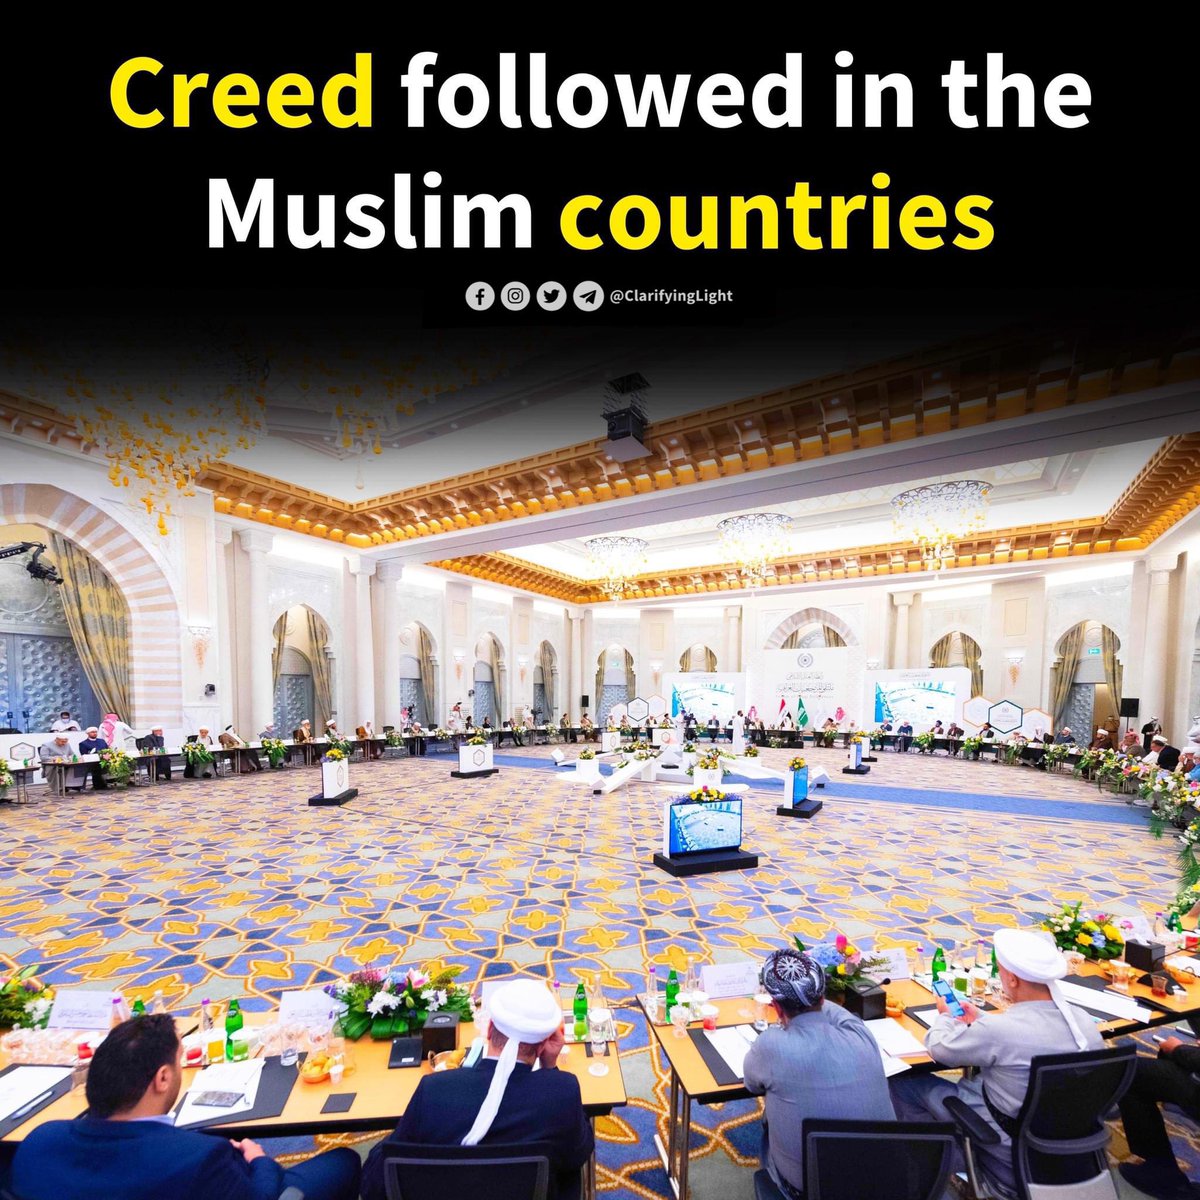 Overview of the Creed of the 𝐦𝐚𝐣𝐨𝐫𝐢𝐭𝐲 𝐨𝐟 𝐌𝐮𝐬𝐥𝐢𝐦𝐬 in different countries (see thread👇):